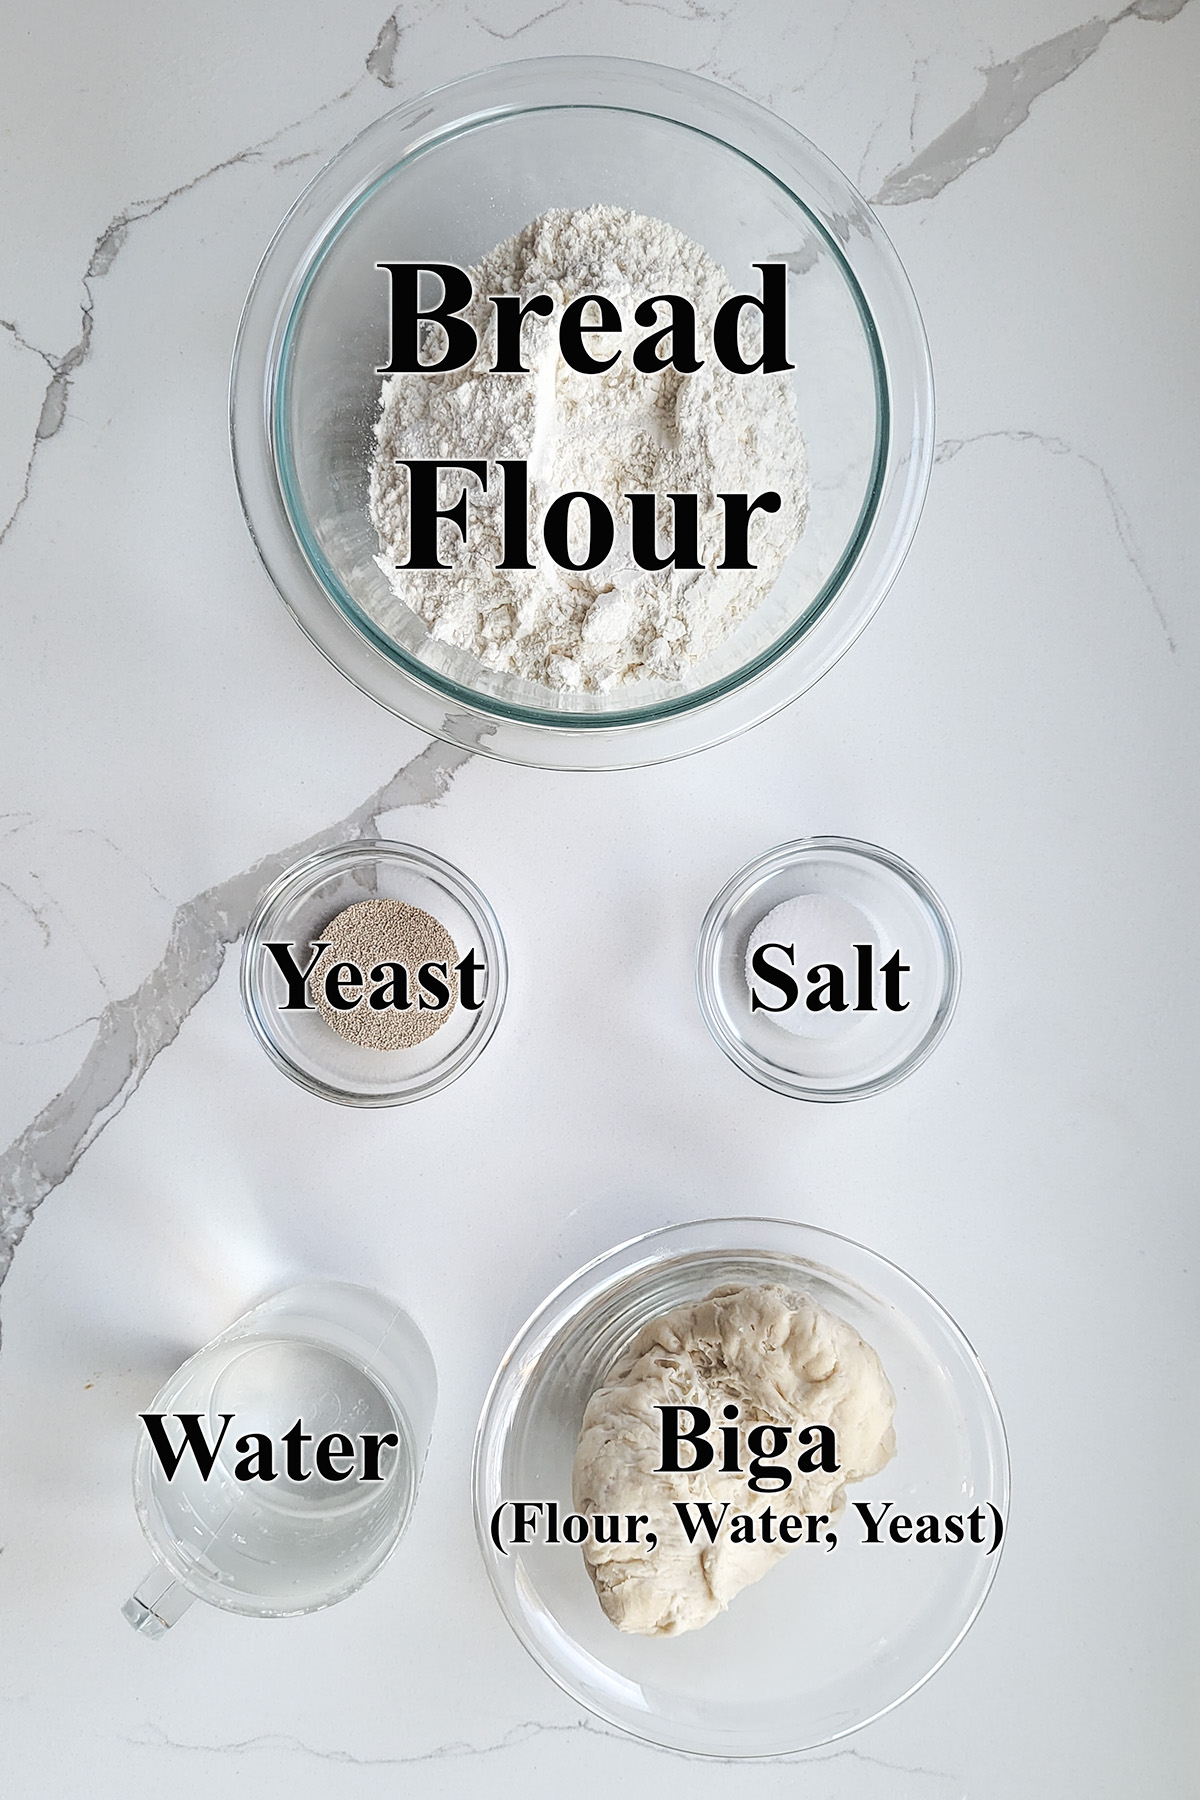 ingredients for ciabatta bread in glass bowls.